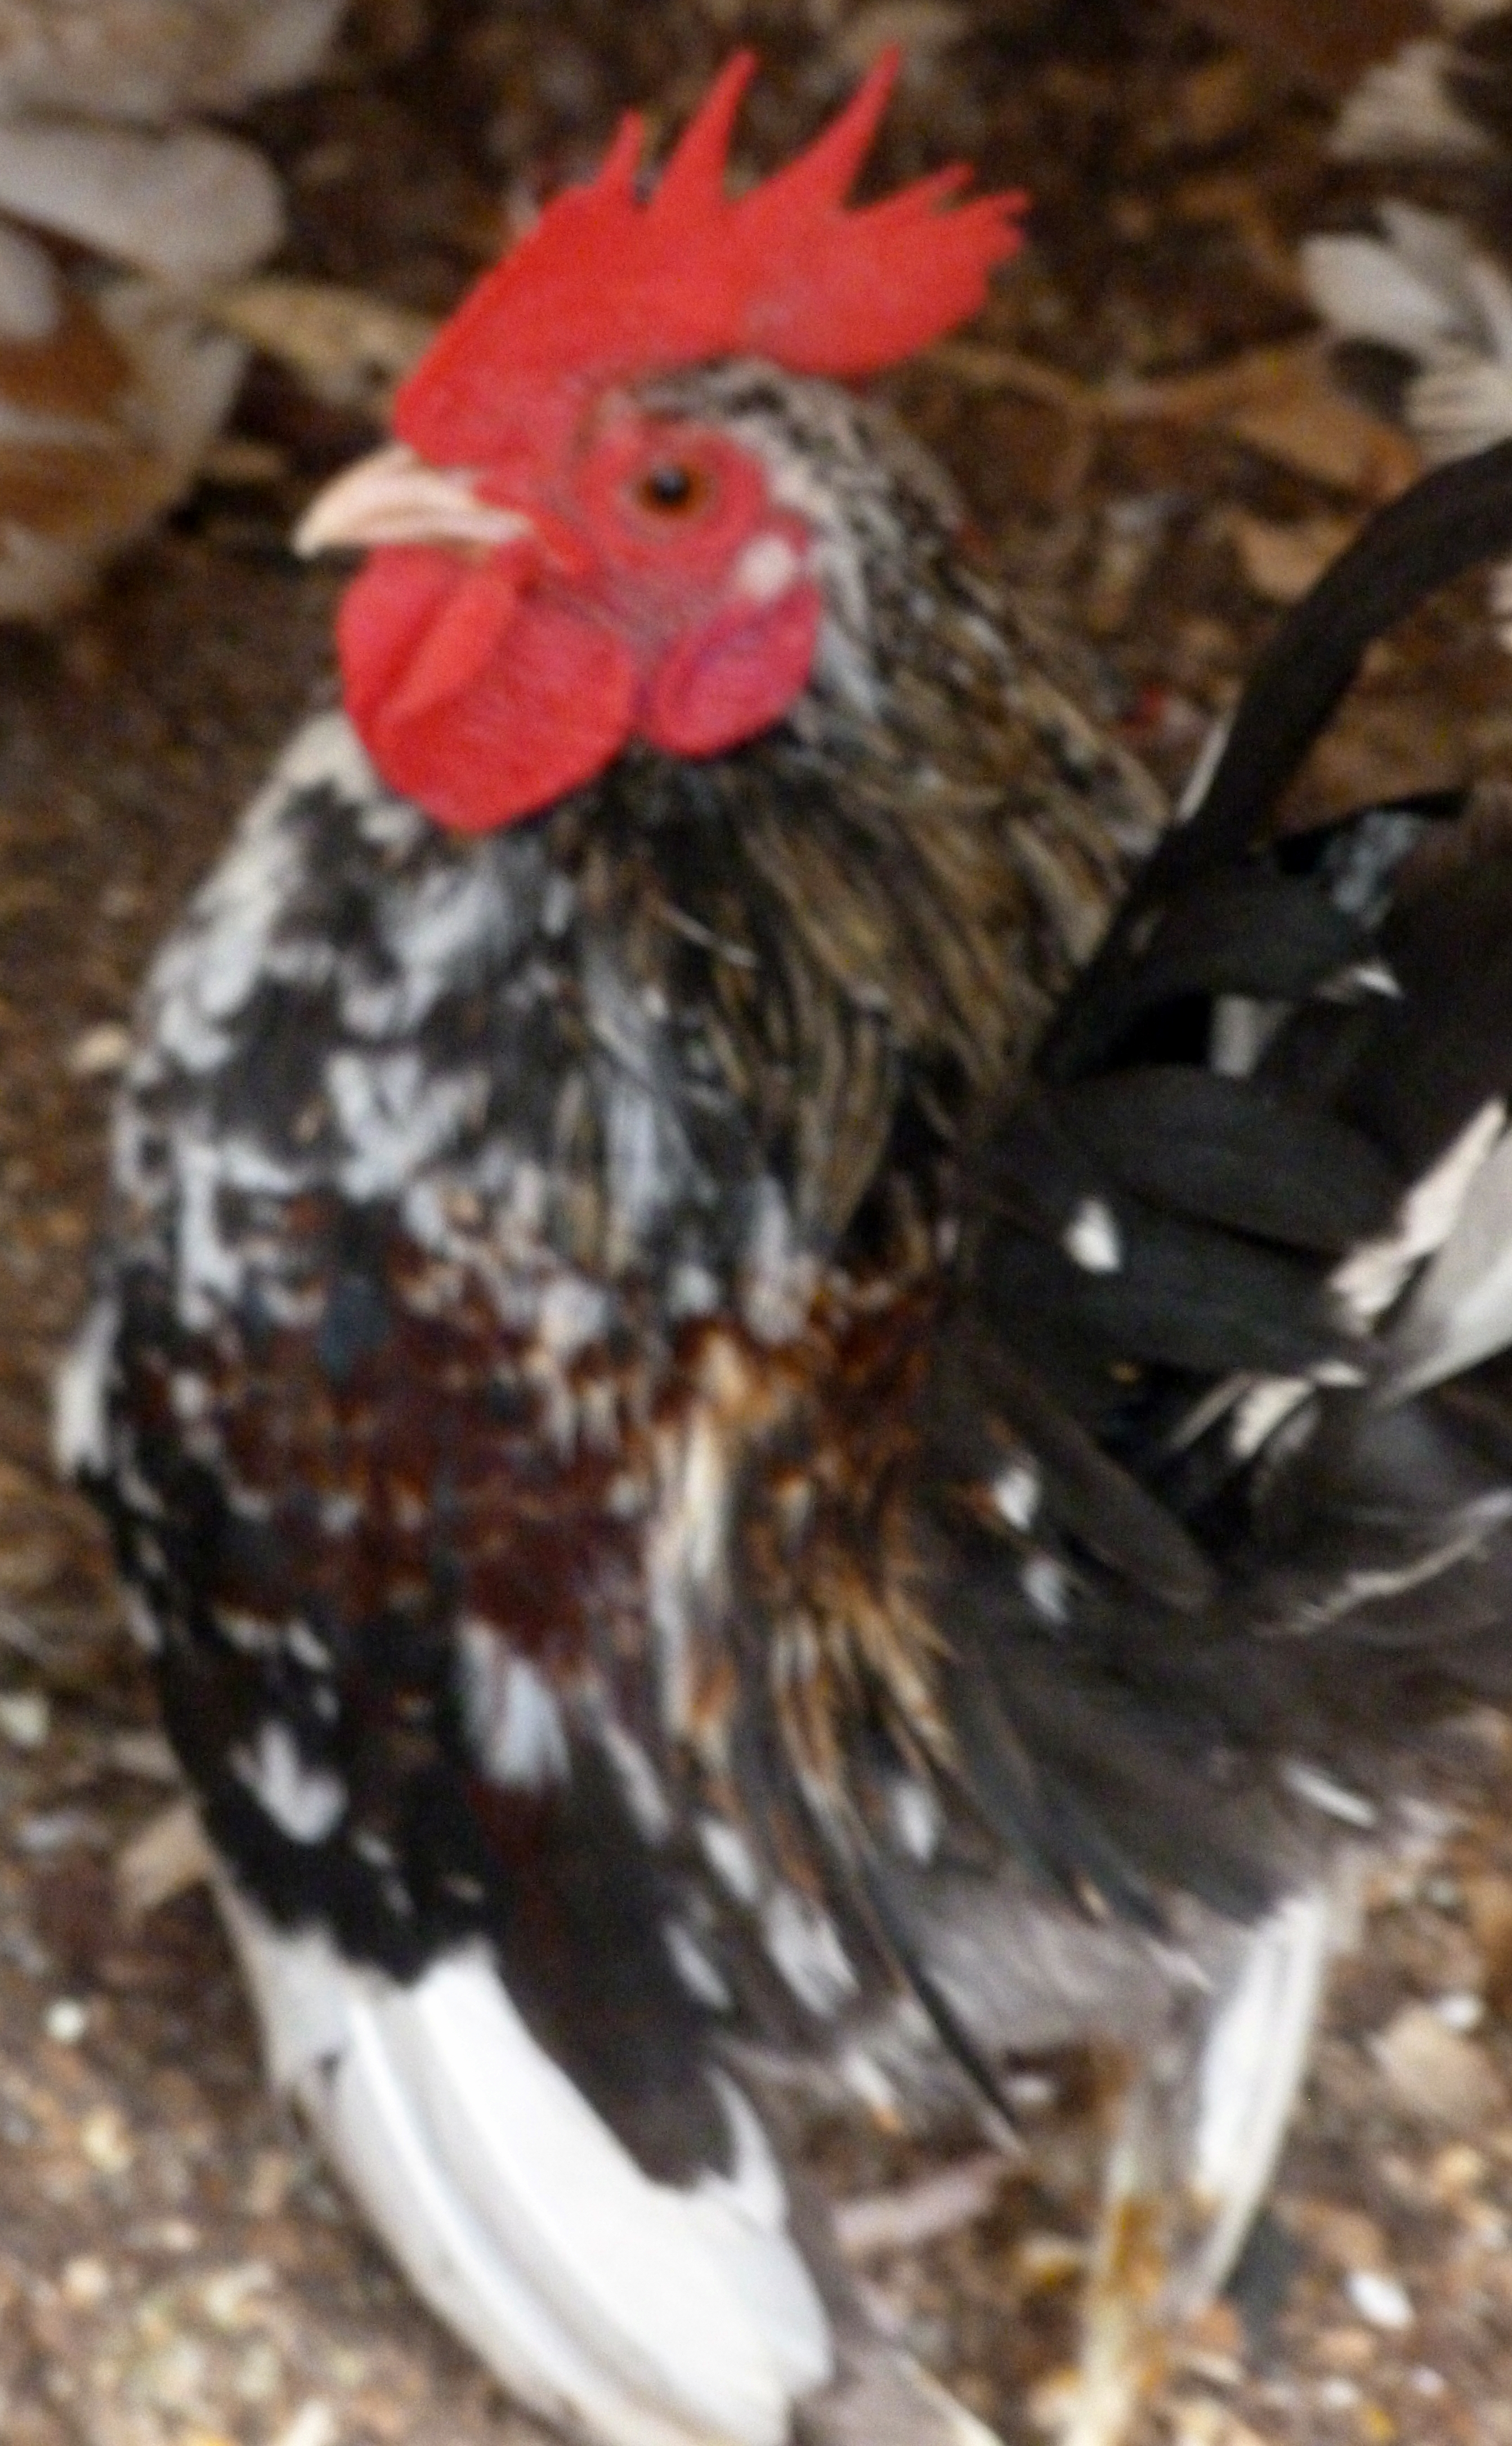 Meet Rosco, he heads the first round of 2016 as of today he has 4 chicks on the ground and 10 growing in the machine. He is amazingly small, and can pose like the best of them, we are using him for his "No Back" and "Micro" class traits. He is over 12 hens.

This is not our roo, he was bought as an egg from the "Campbell" line, that we have been amazingly impressed with, and as you can see we are heading him over the coop, giving us several nice genetic pairings. Hatched and Raised by McDonald, bred by Campbell.